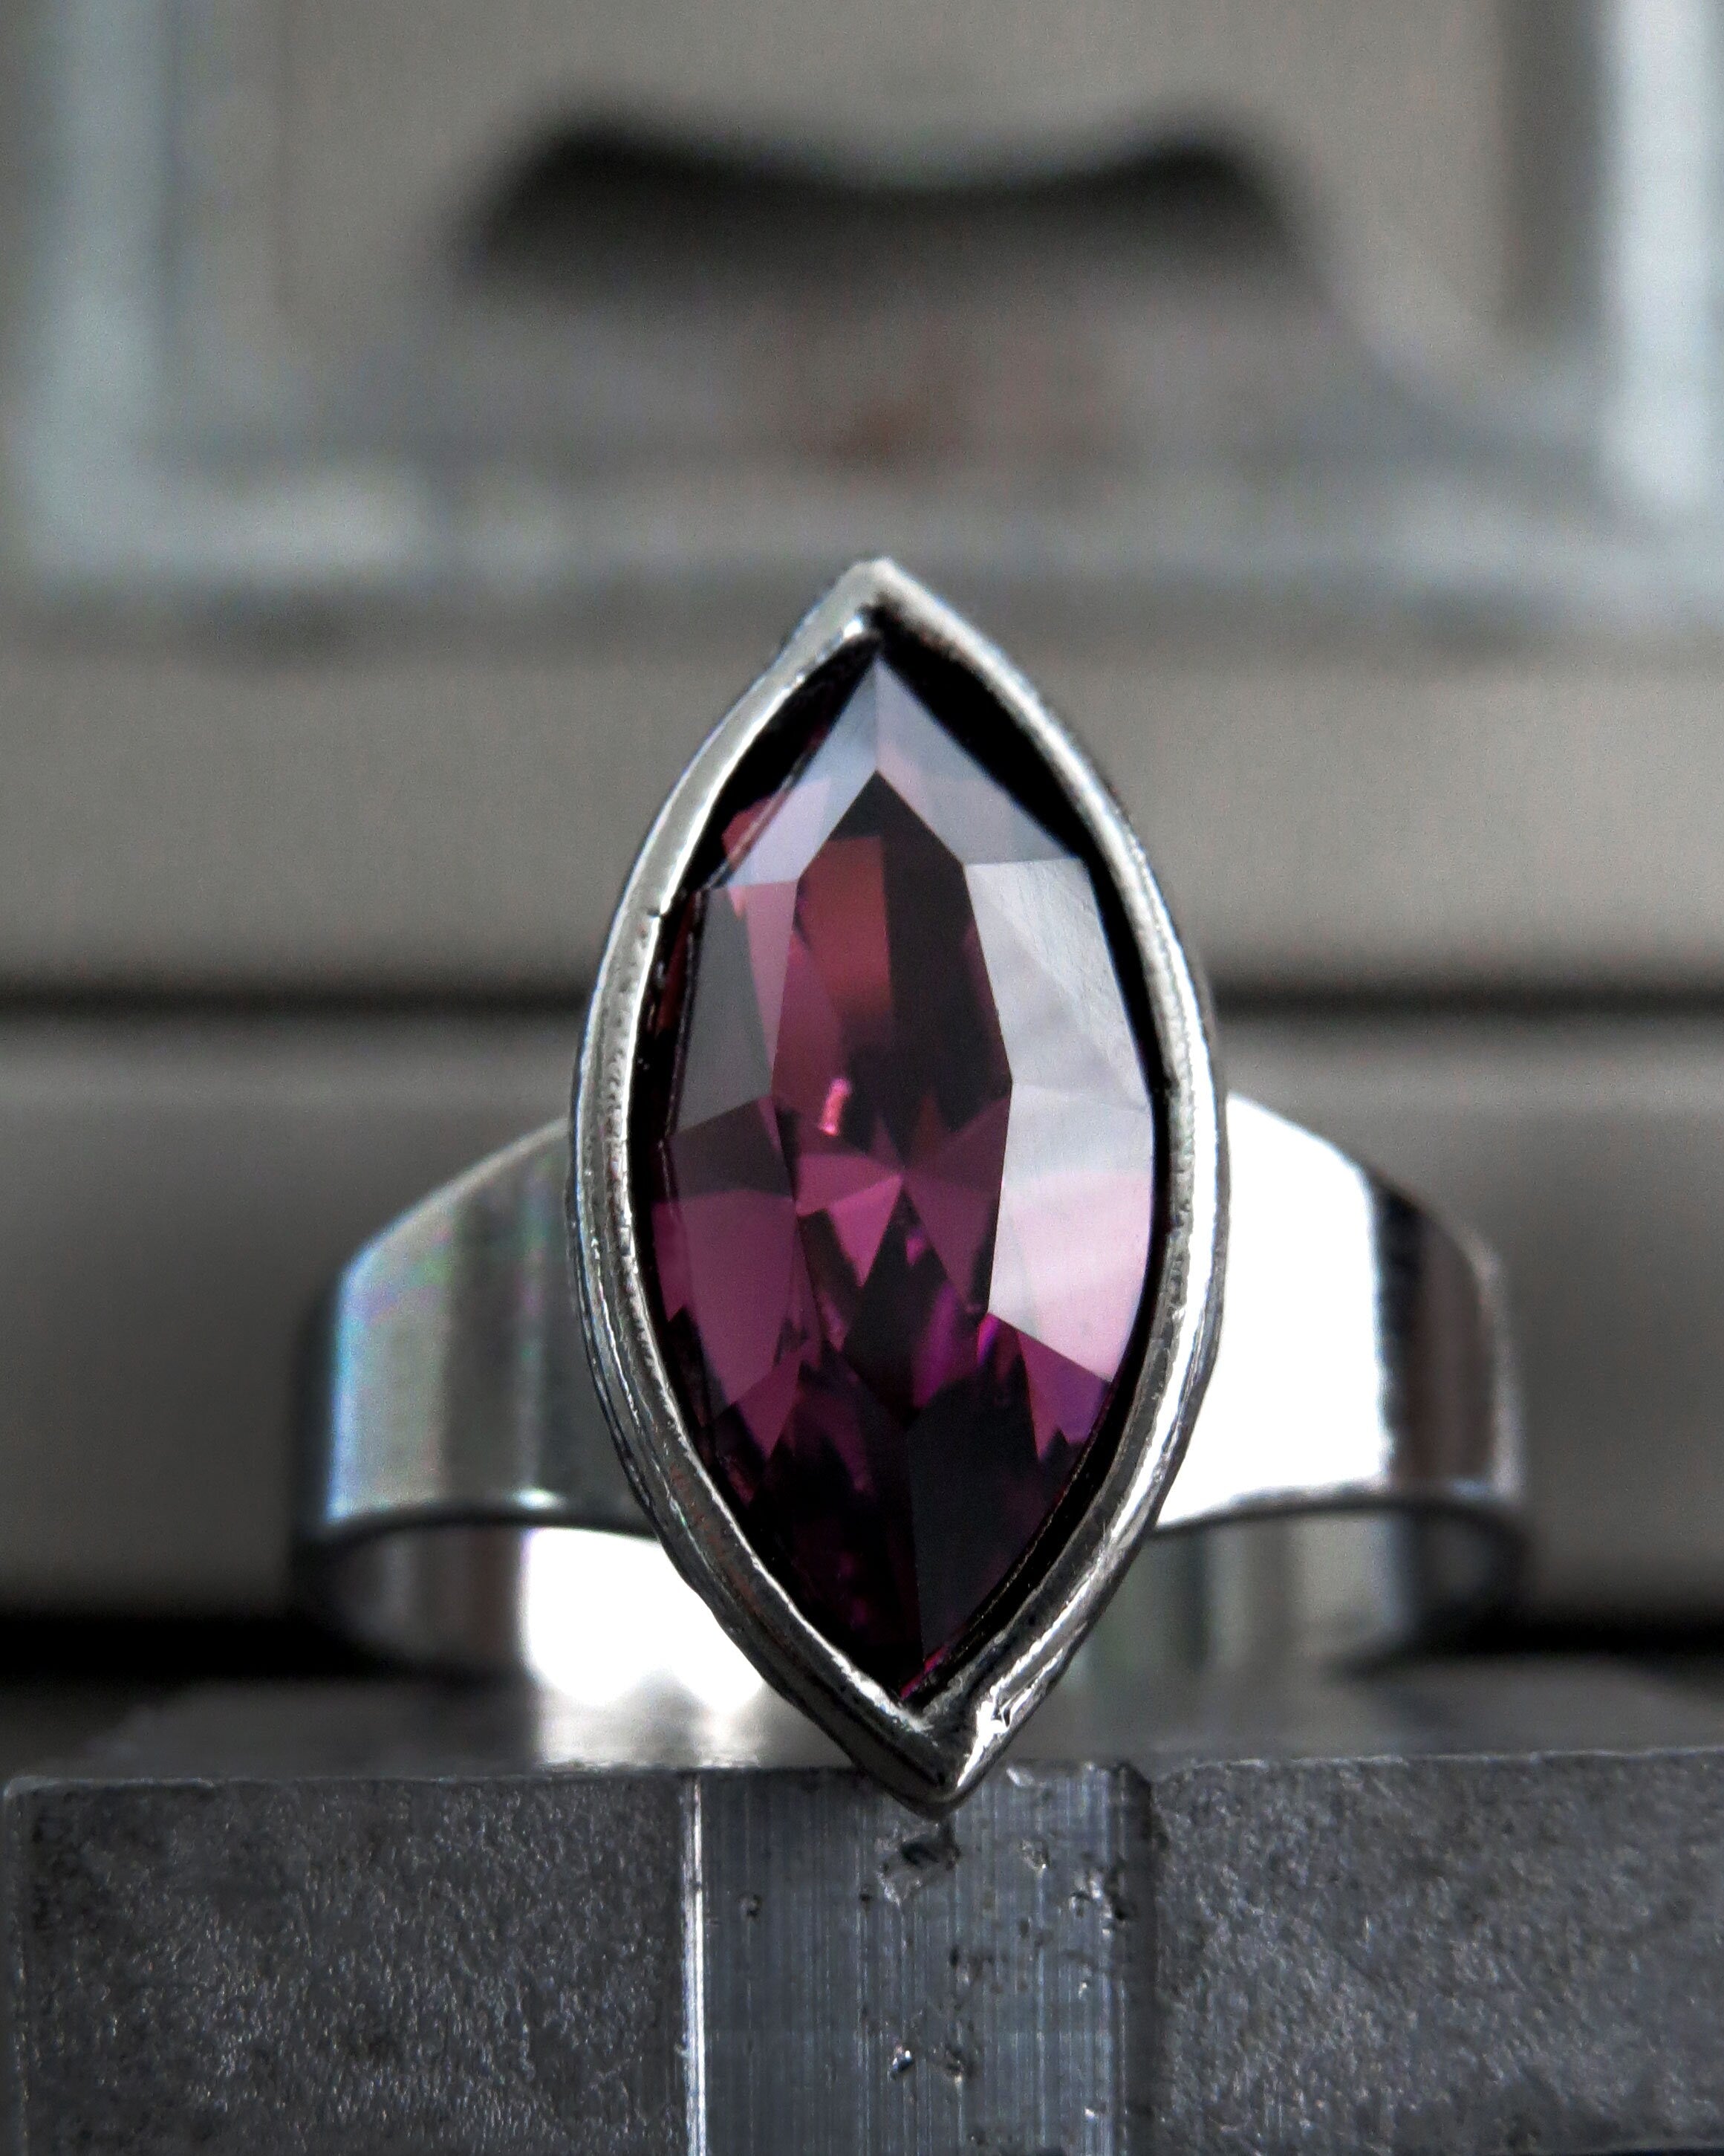 OCCULT - Gothic Purple Crystal Ring, Small Amethyst Crystal Navette Crystal Ring, Purple Witch Crystal Ring, Purple Gothic Halloween Ring